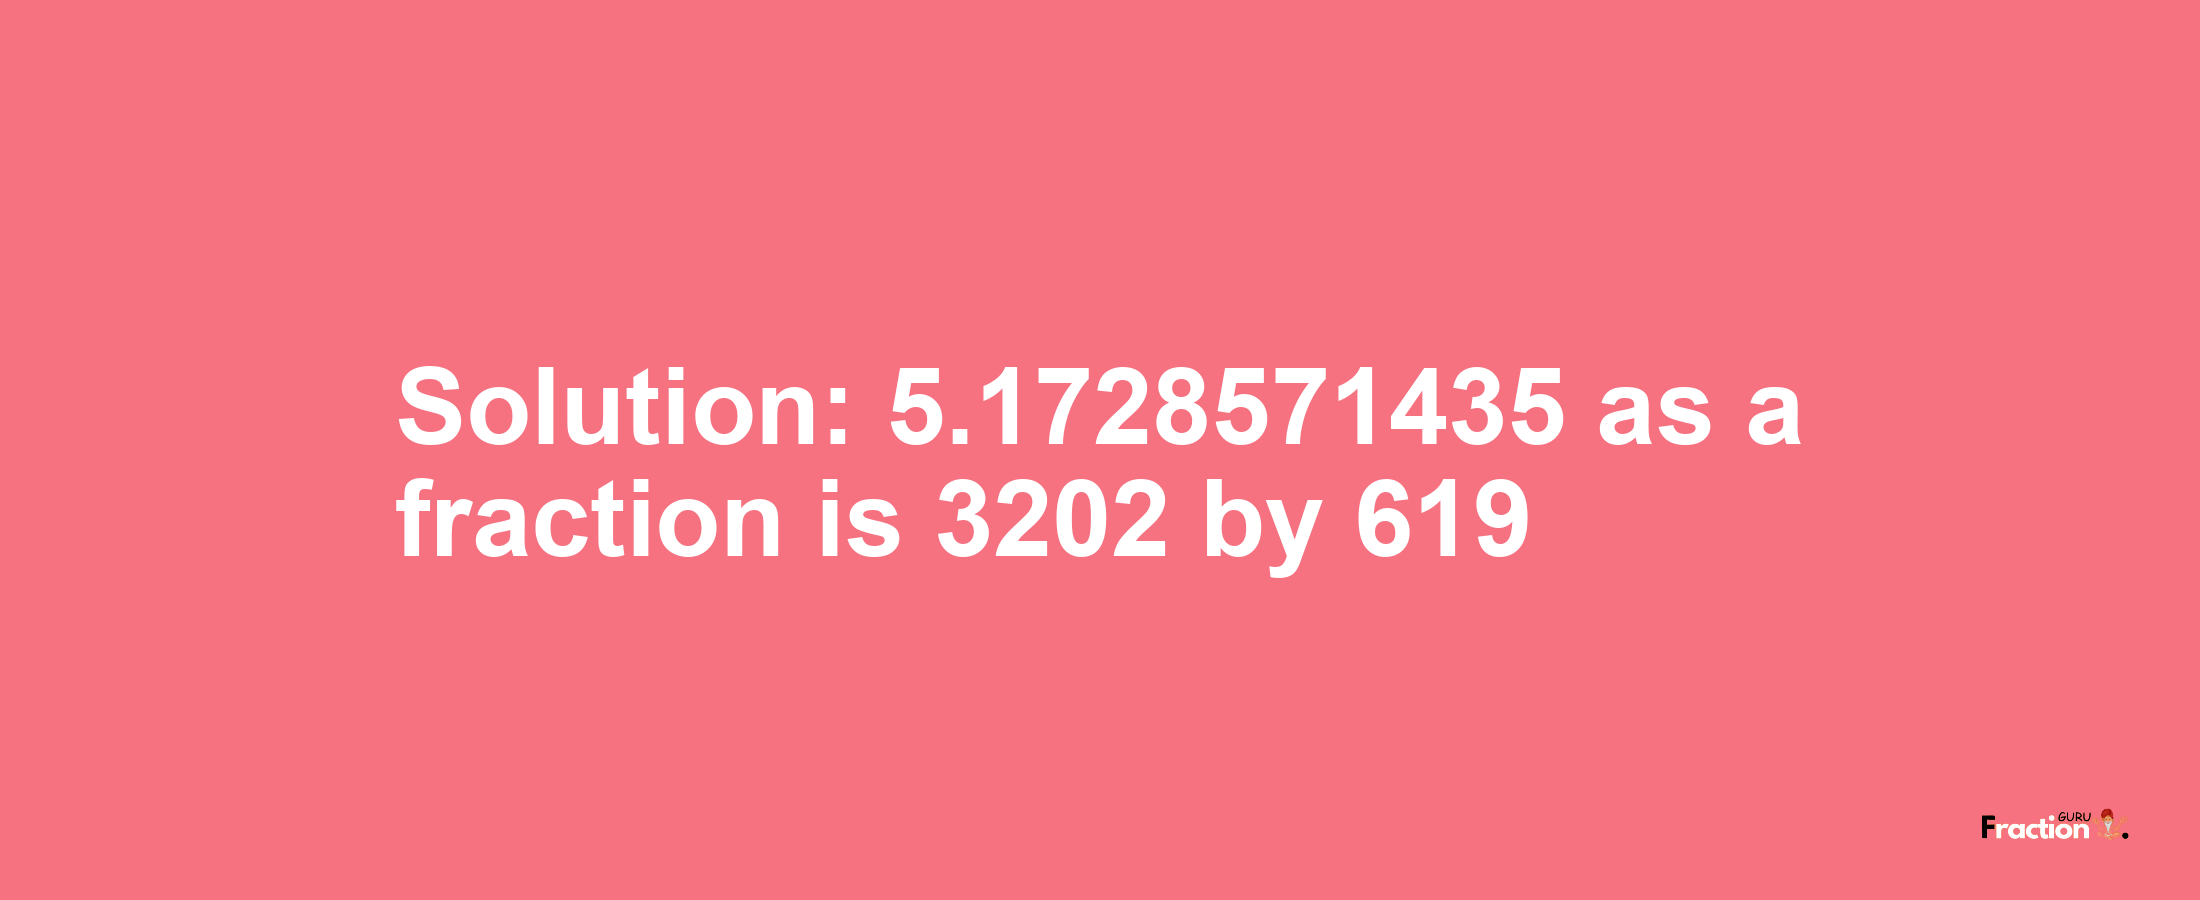 Solution:5.1728571435 as a fraction is 3202/619